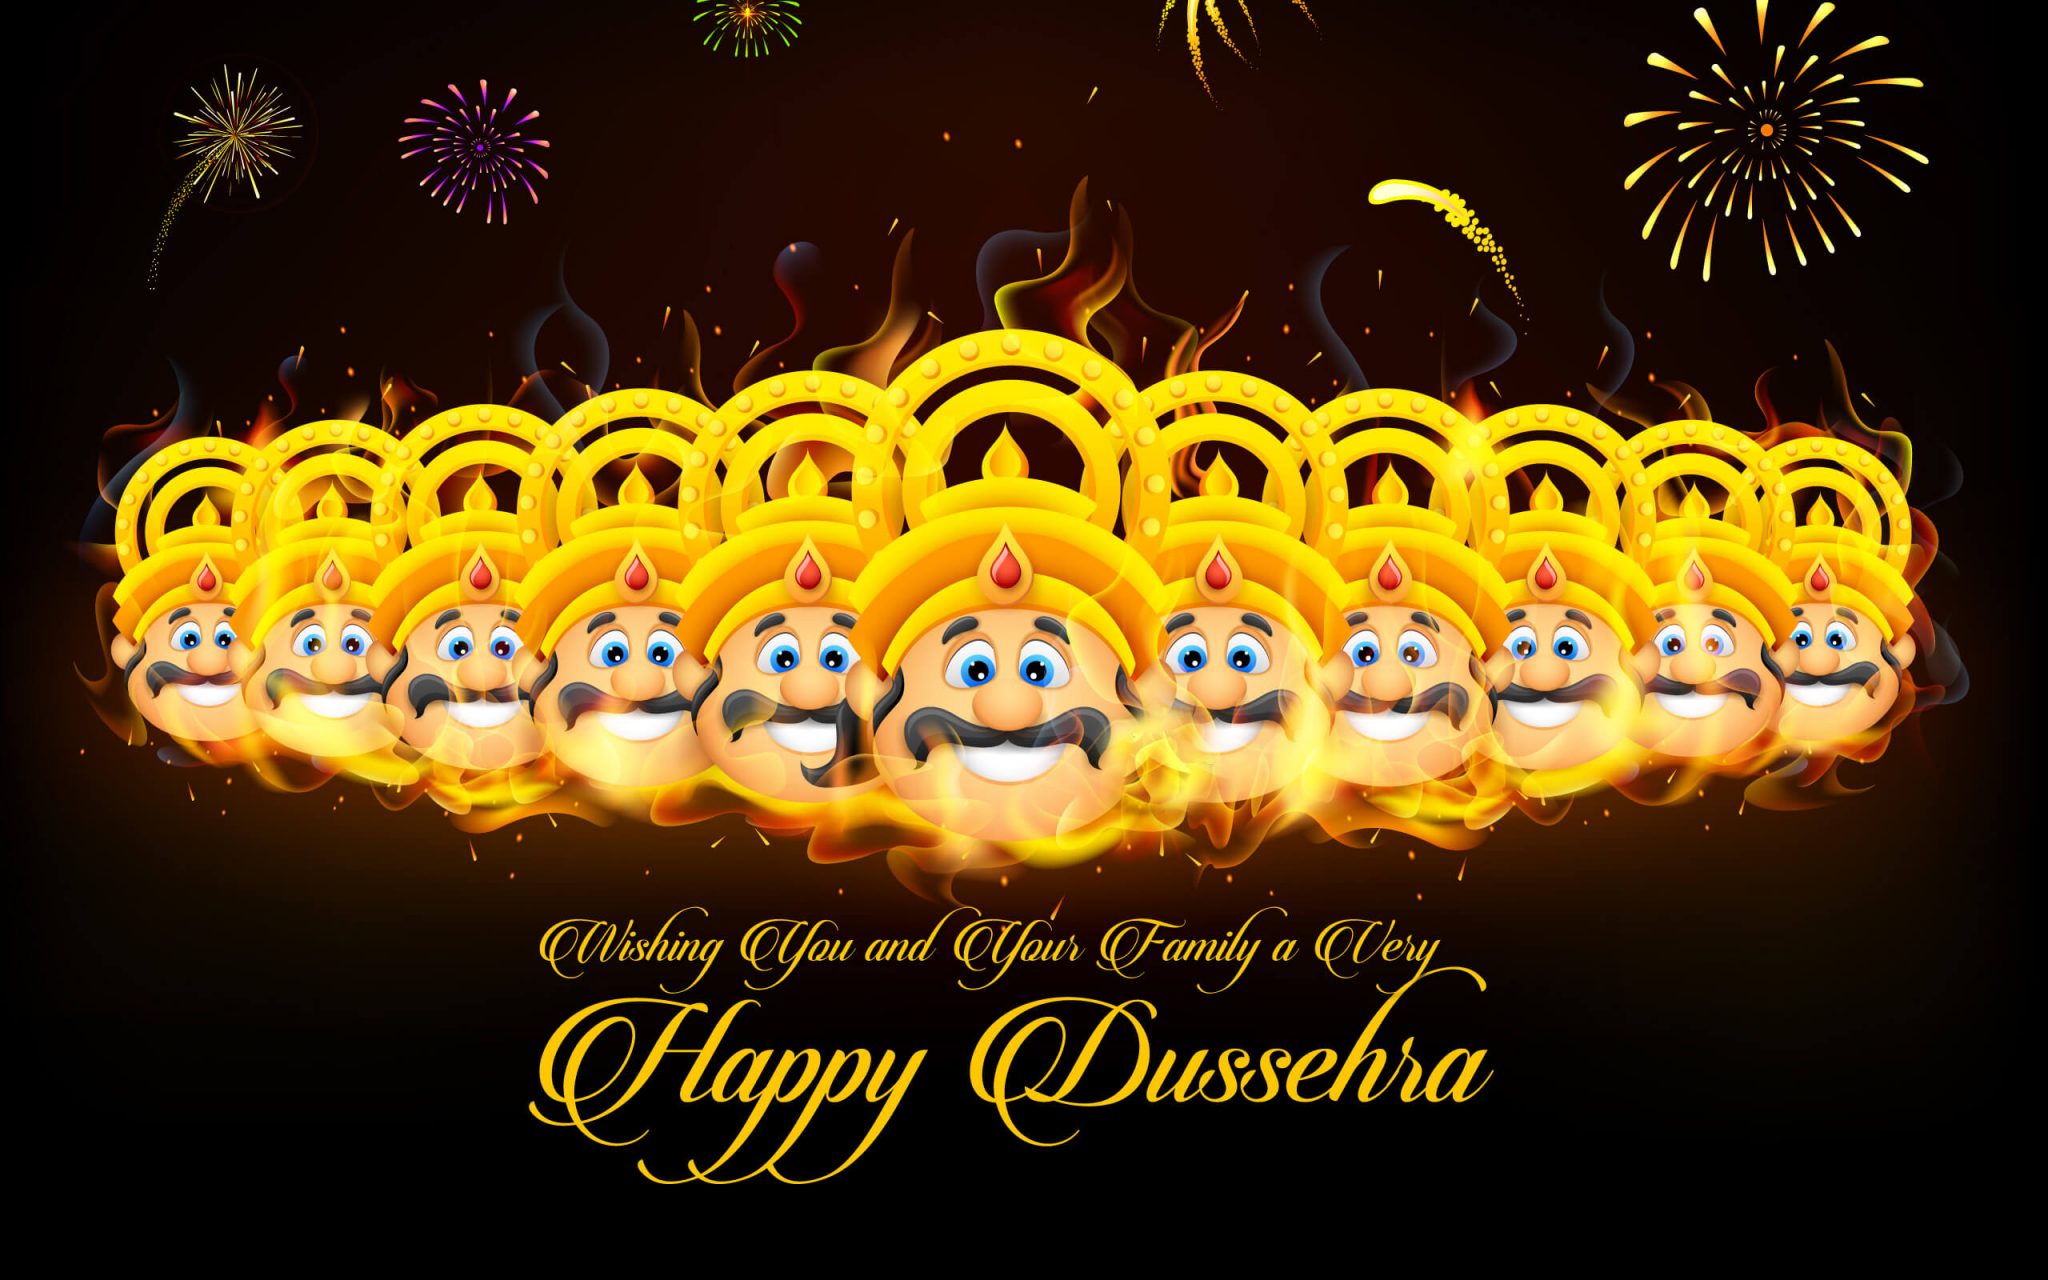 Happy Dussehra Images, Pictures, Wallpapers to celebrate ...